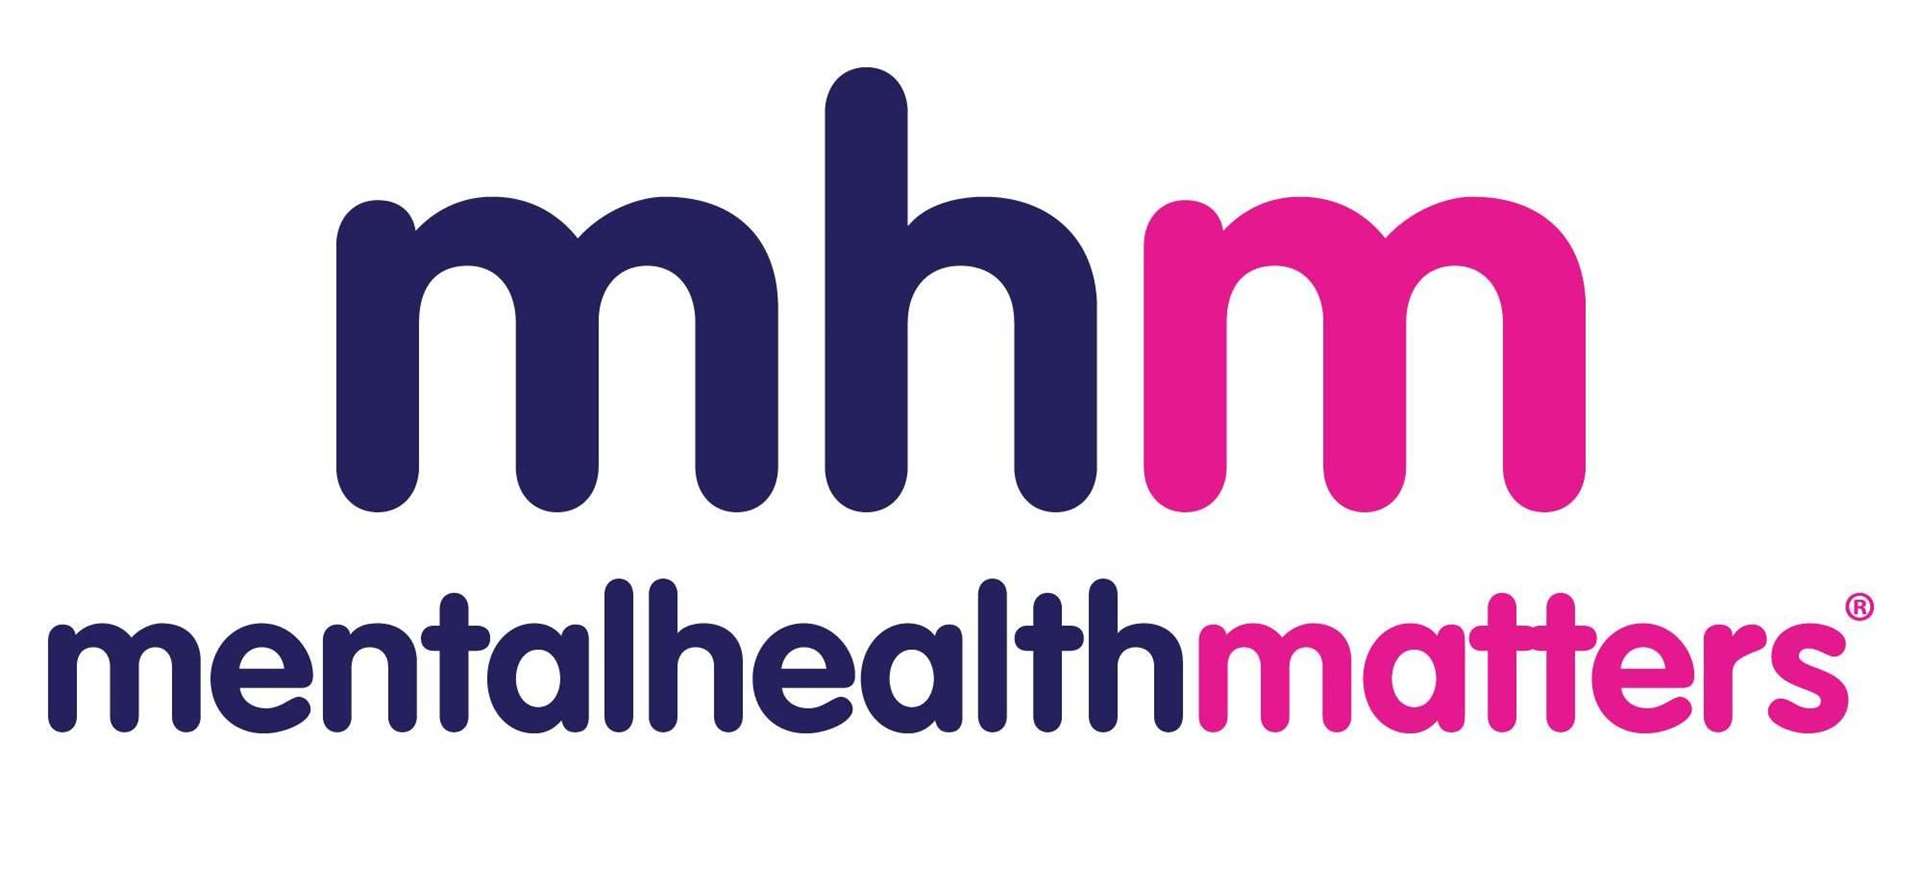 Mental Health Matters (MHM) is a national charity with over 35 years of experience in delivering high-quality mental health and social care services.